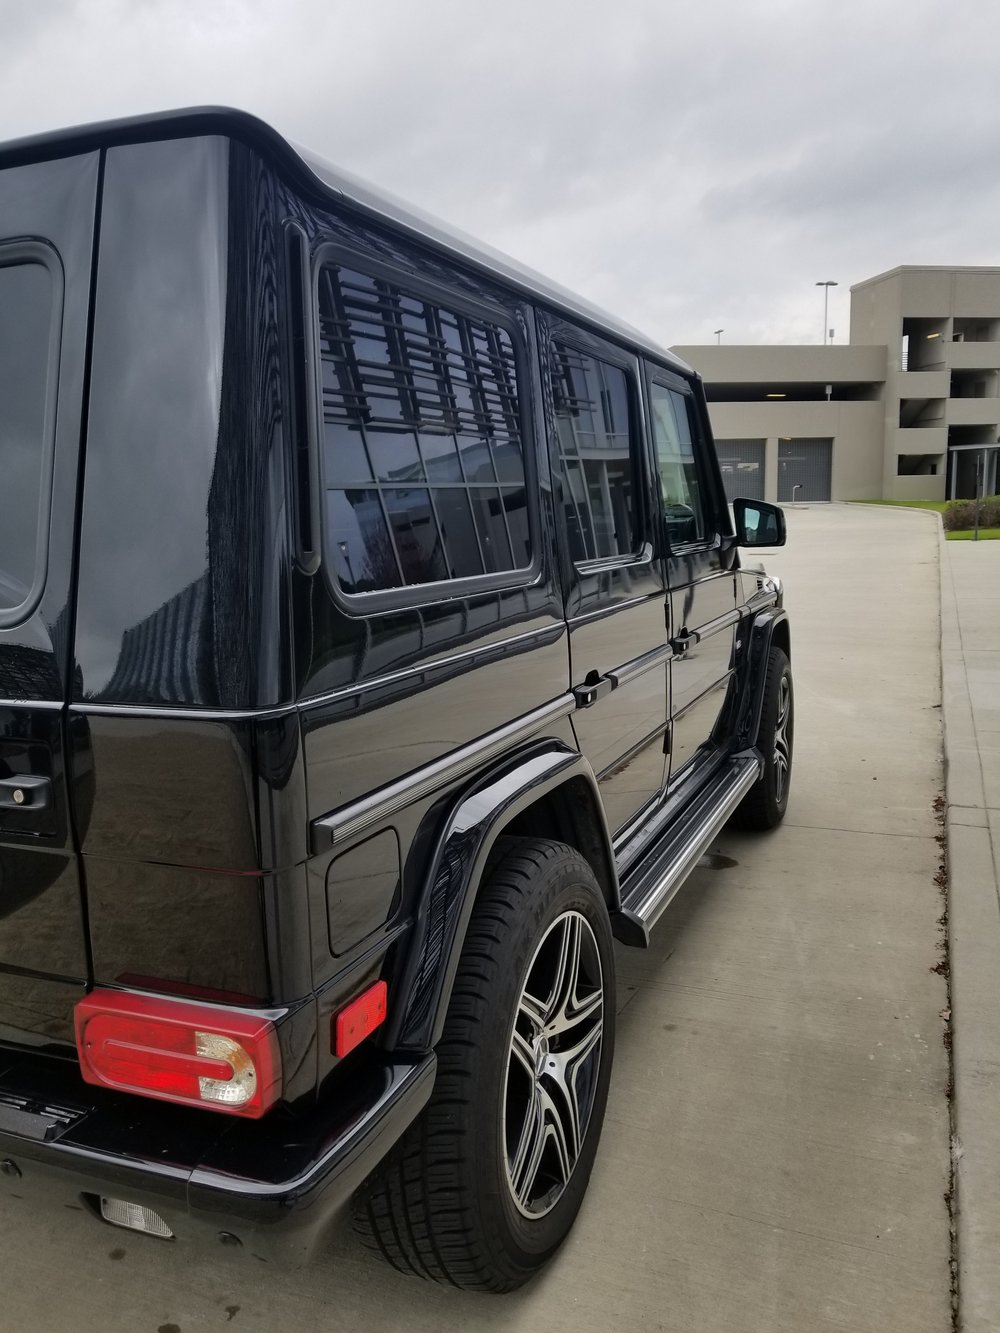 Rent A G Wagon In Houston Exotic Car Rental Houston The Woodlands